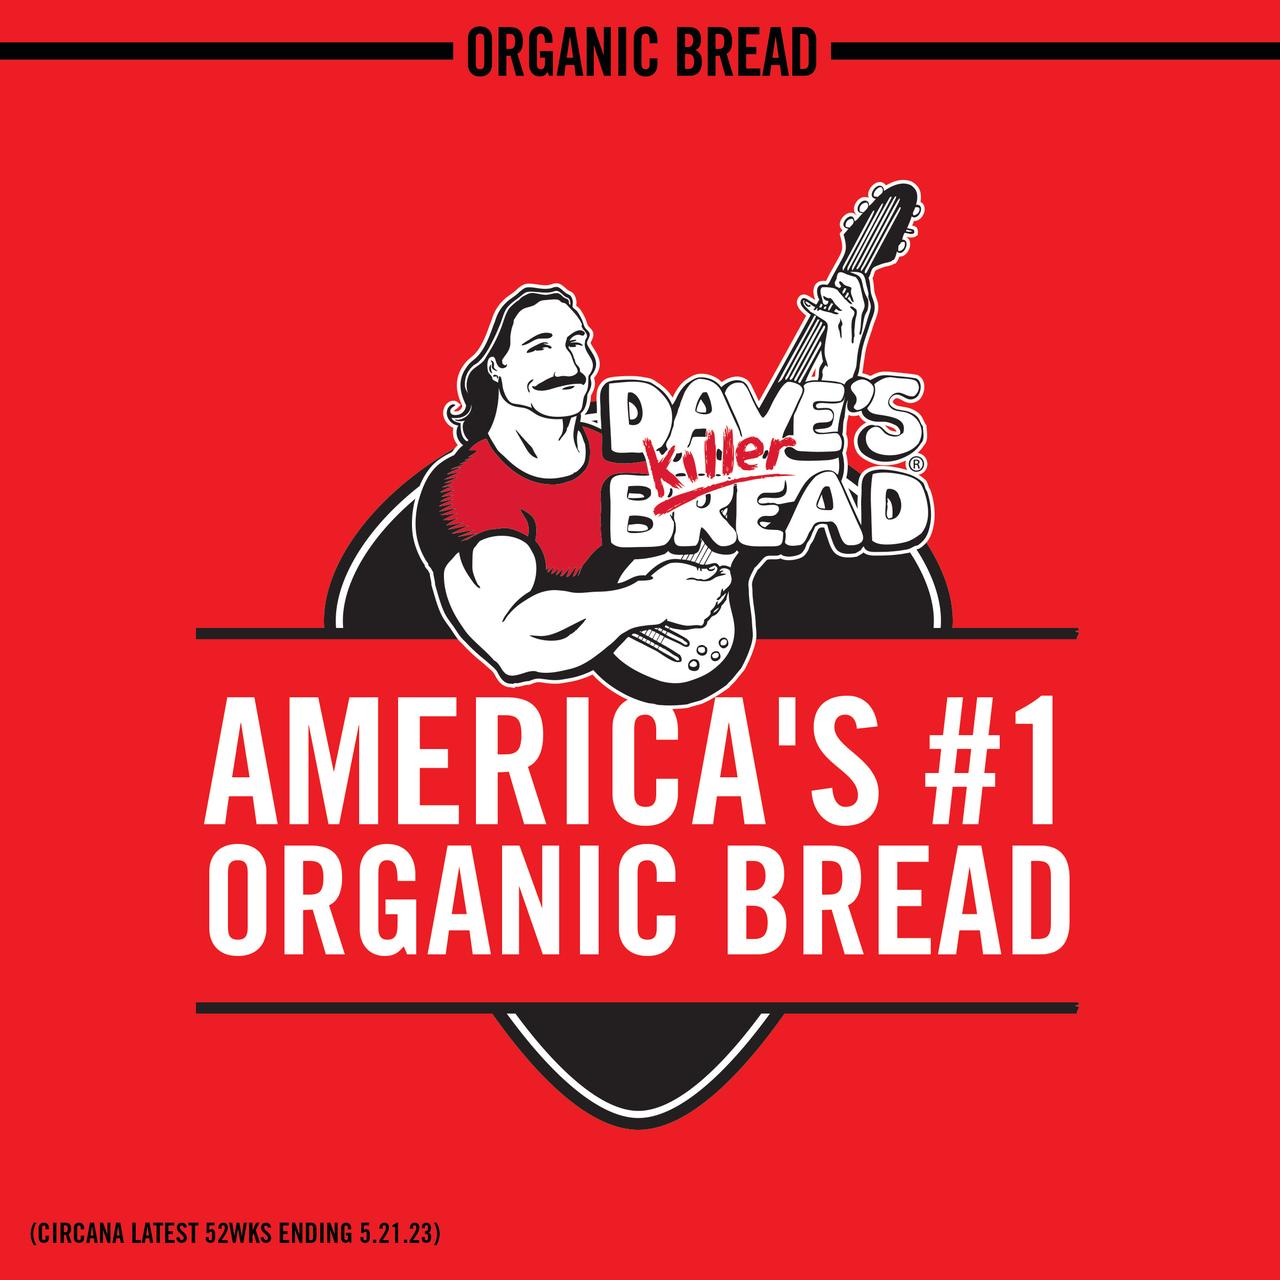 Dave's Killer Bread Good Seed Thin-Sliced Organic Bread Loaf, 20.5 oz - image 5 of 17